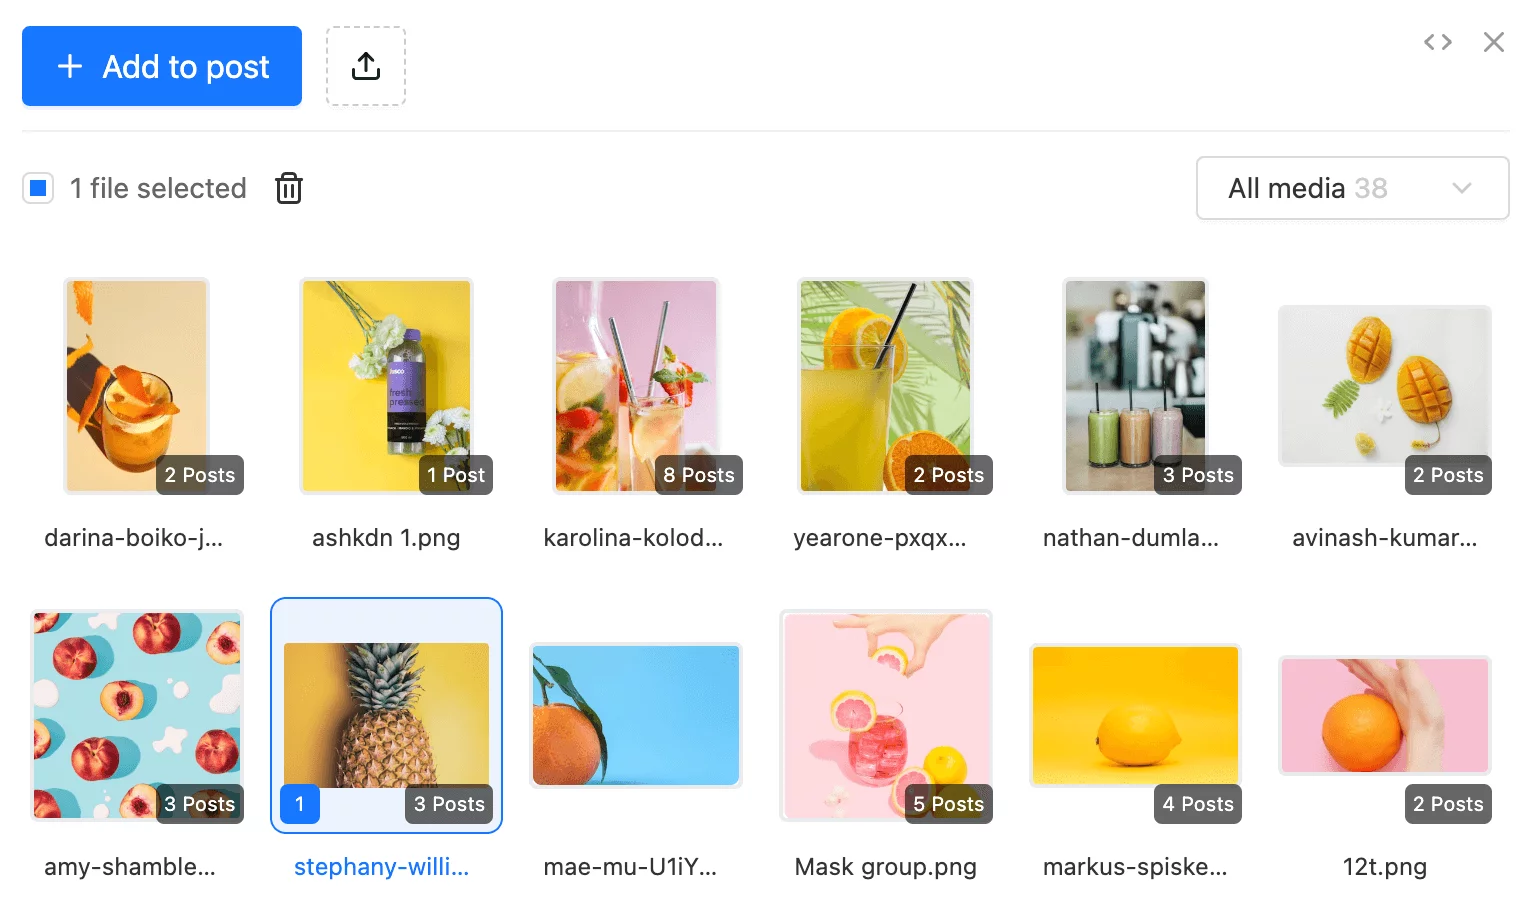 Media library screenshot showing fruits and cocktails images with an Add to post action button.